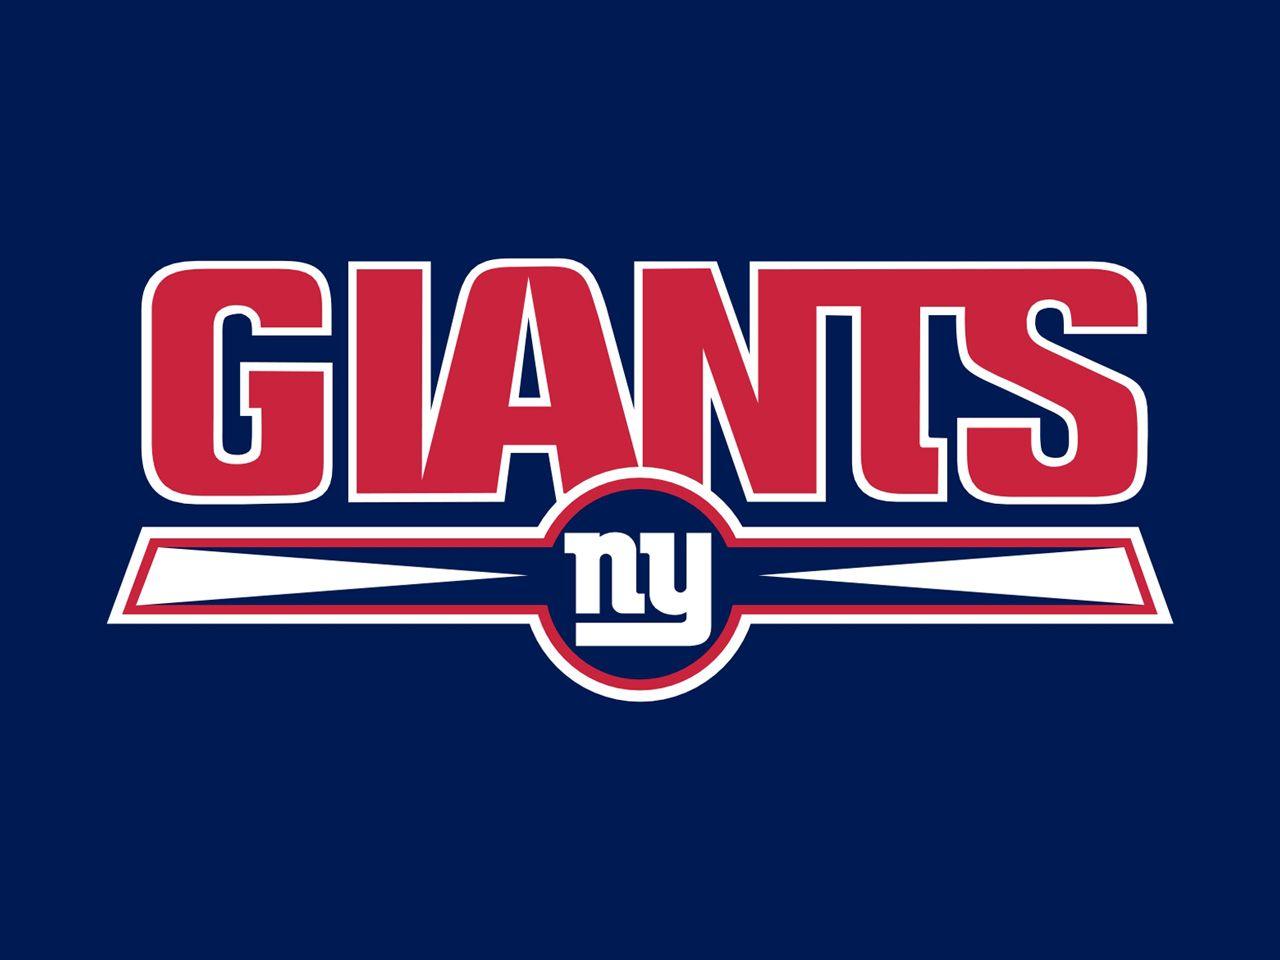 The New York Giants suffered another tough loss this week in their